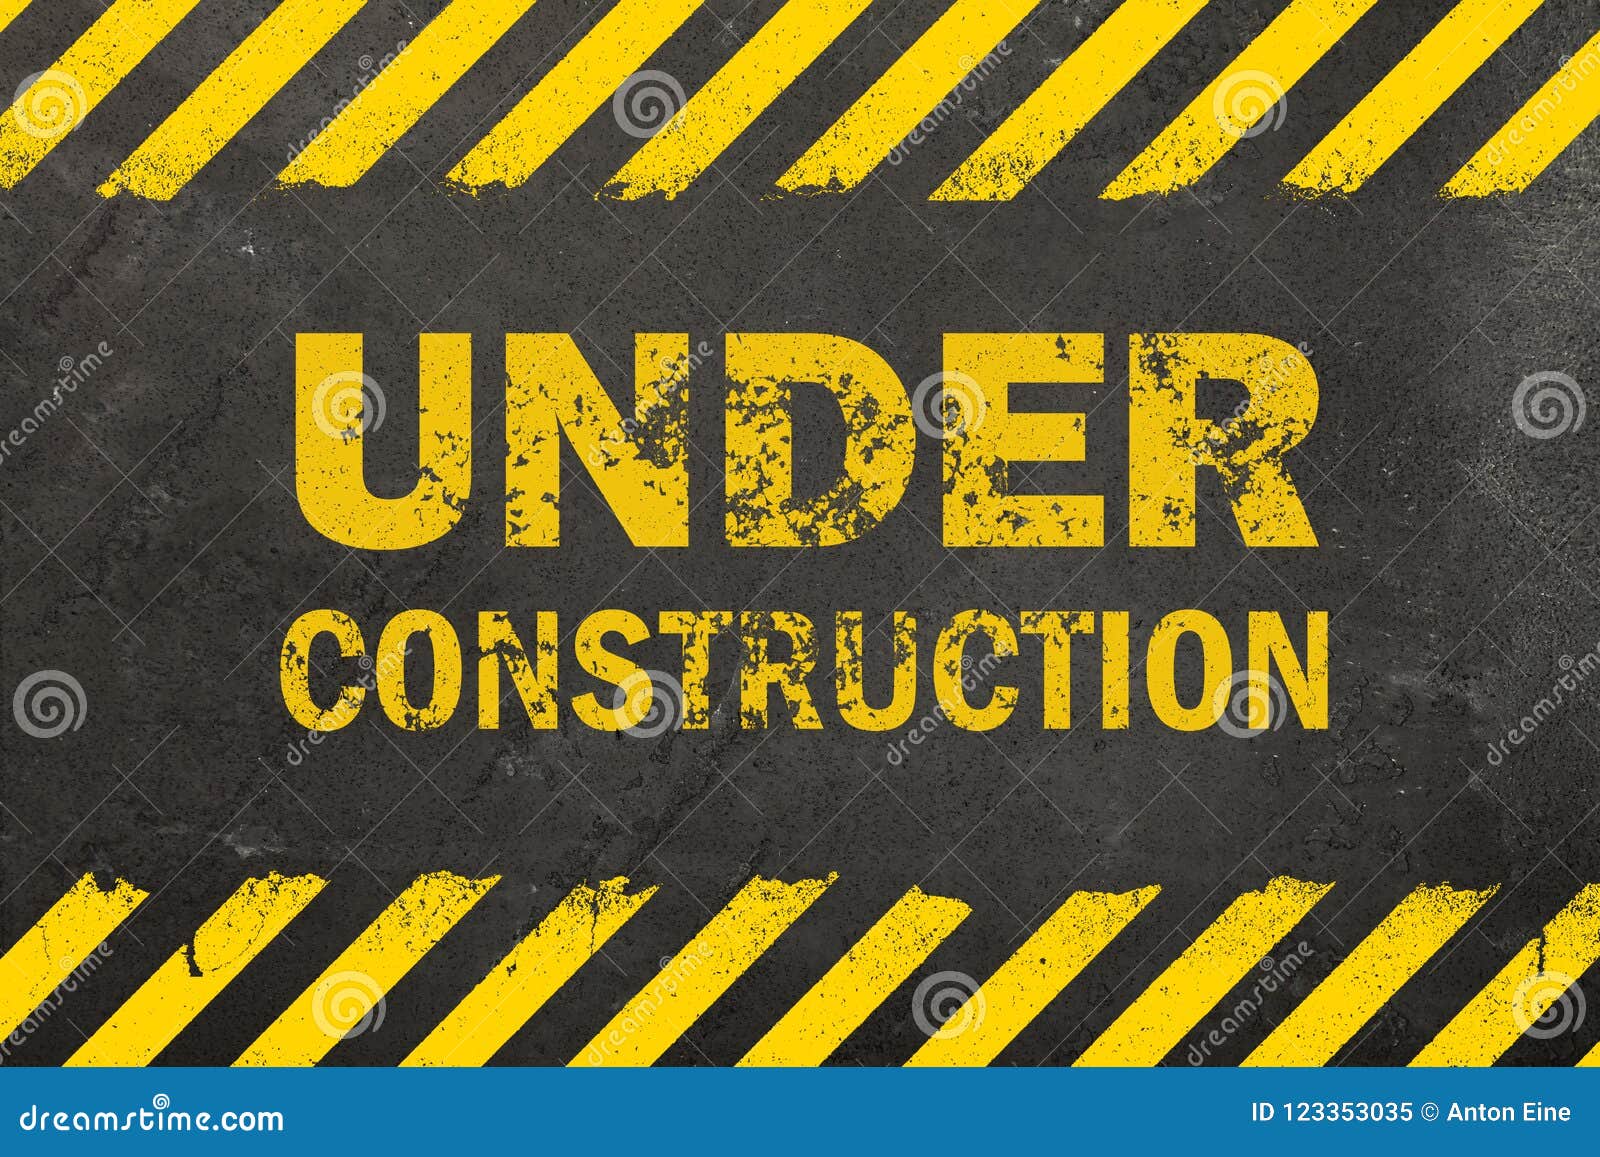 Concrete Background with Under Construction Sign Stock Image - Image of ...